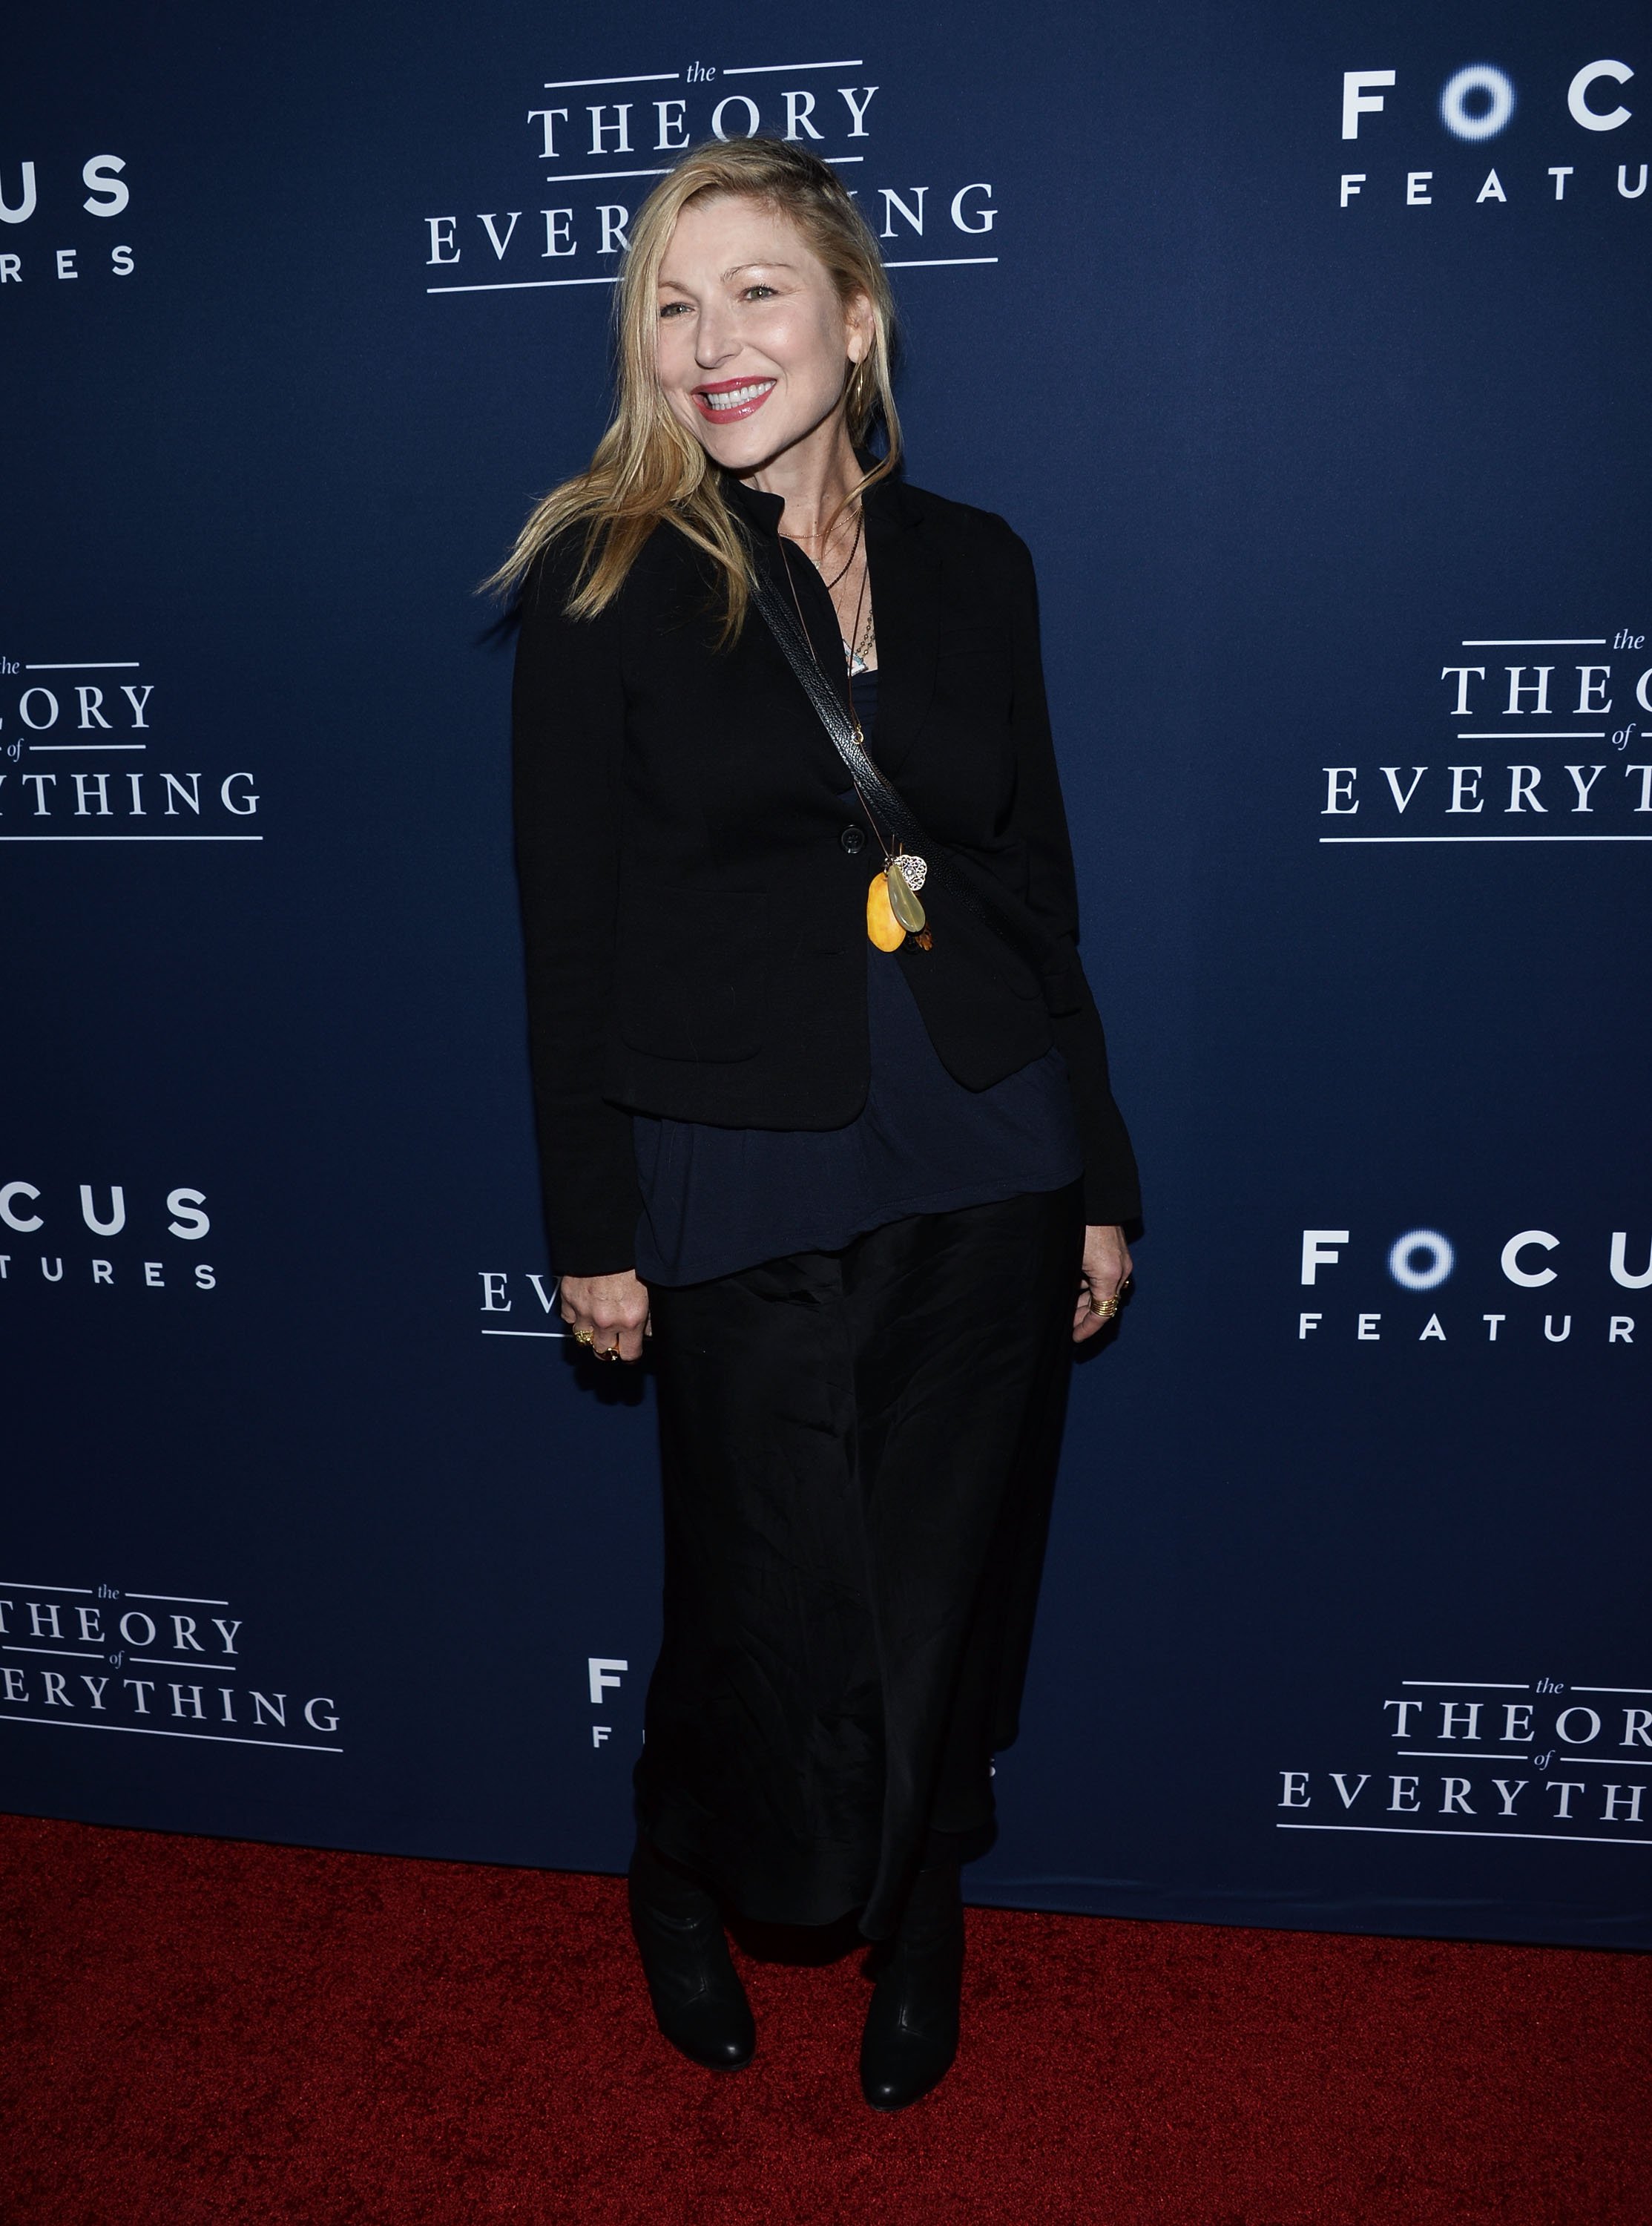 Tatum O'Neal arrives at the Los Angeles premiere of "The Theory Of Everything" on October 28, 2014 | Photo: Getty Images